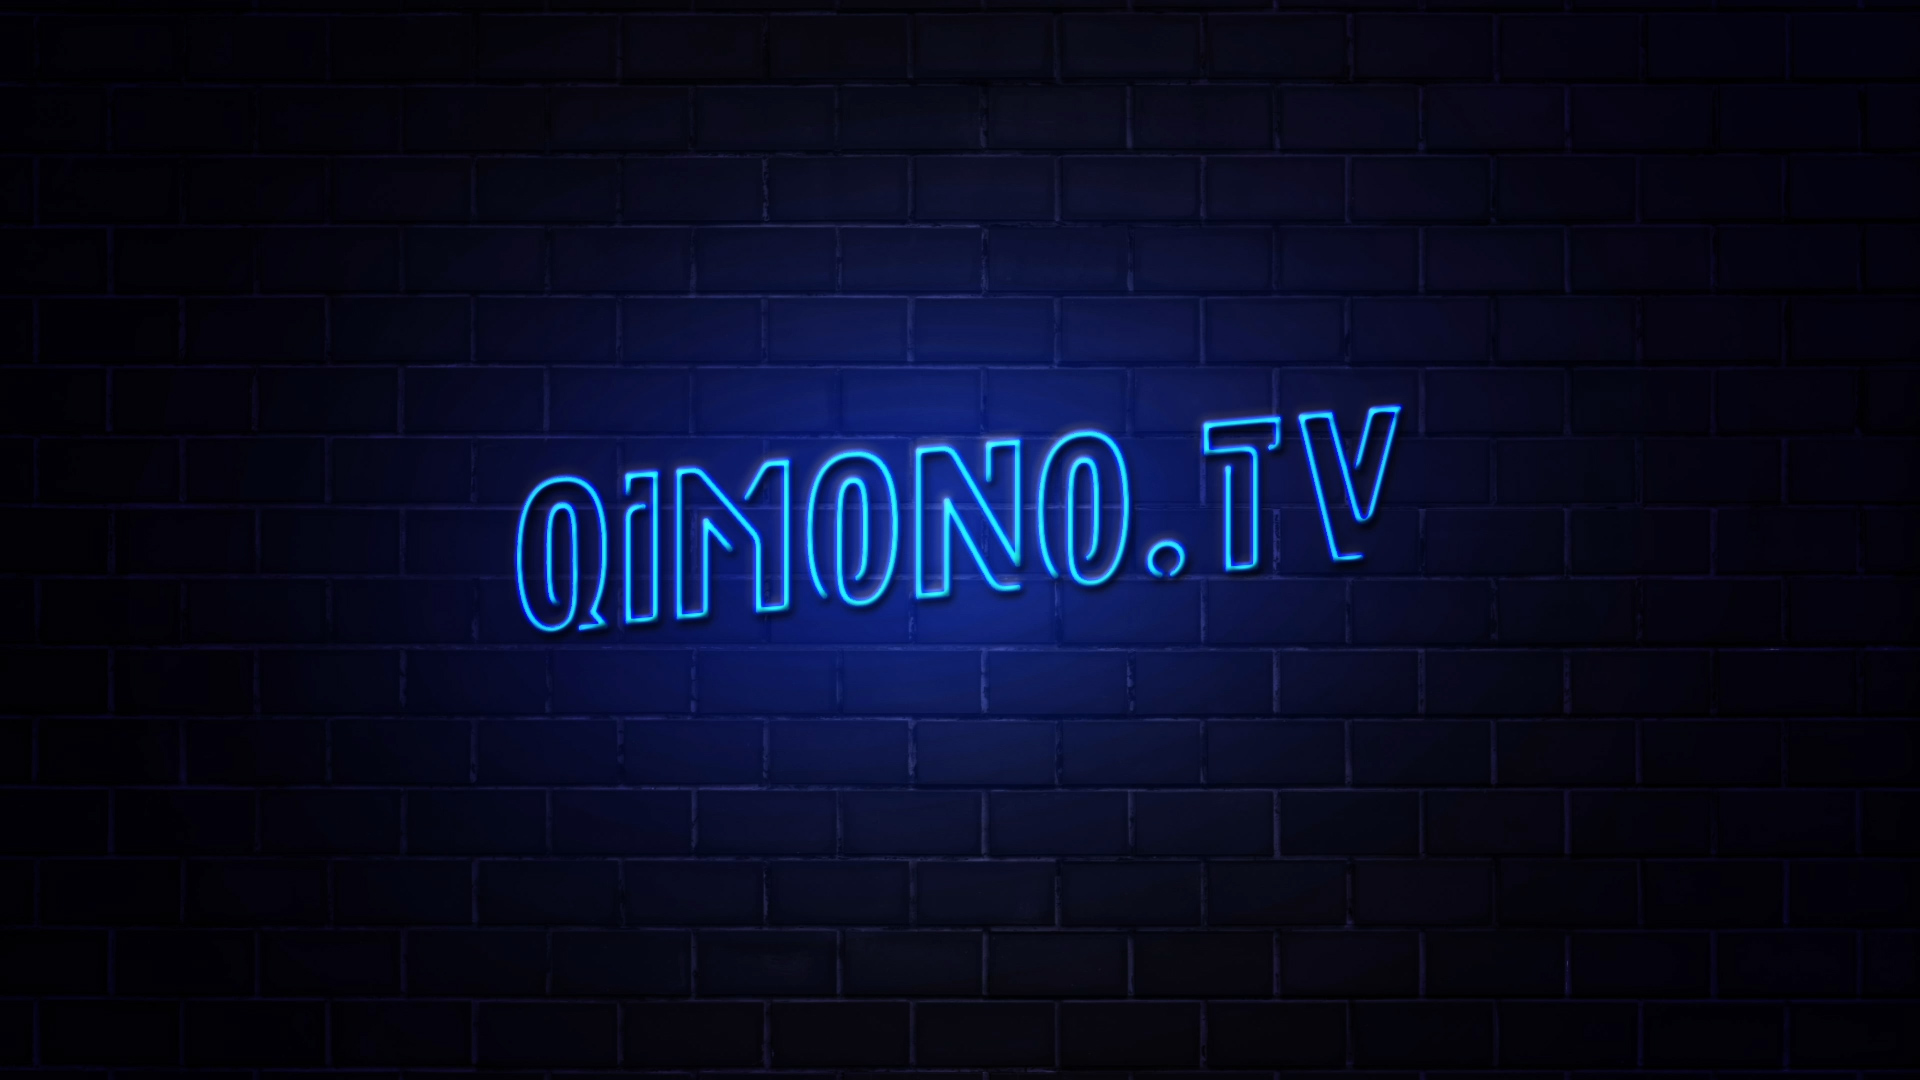 You are currently viewing Qimono.tv